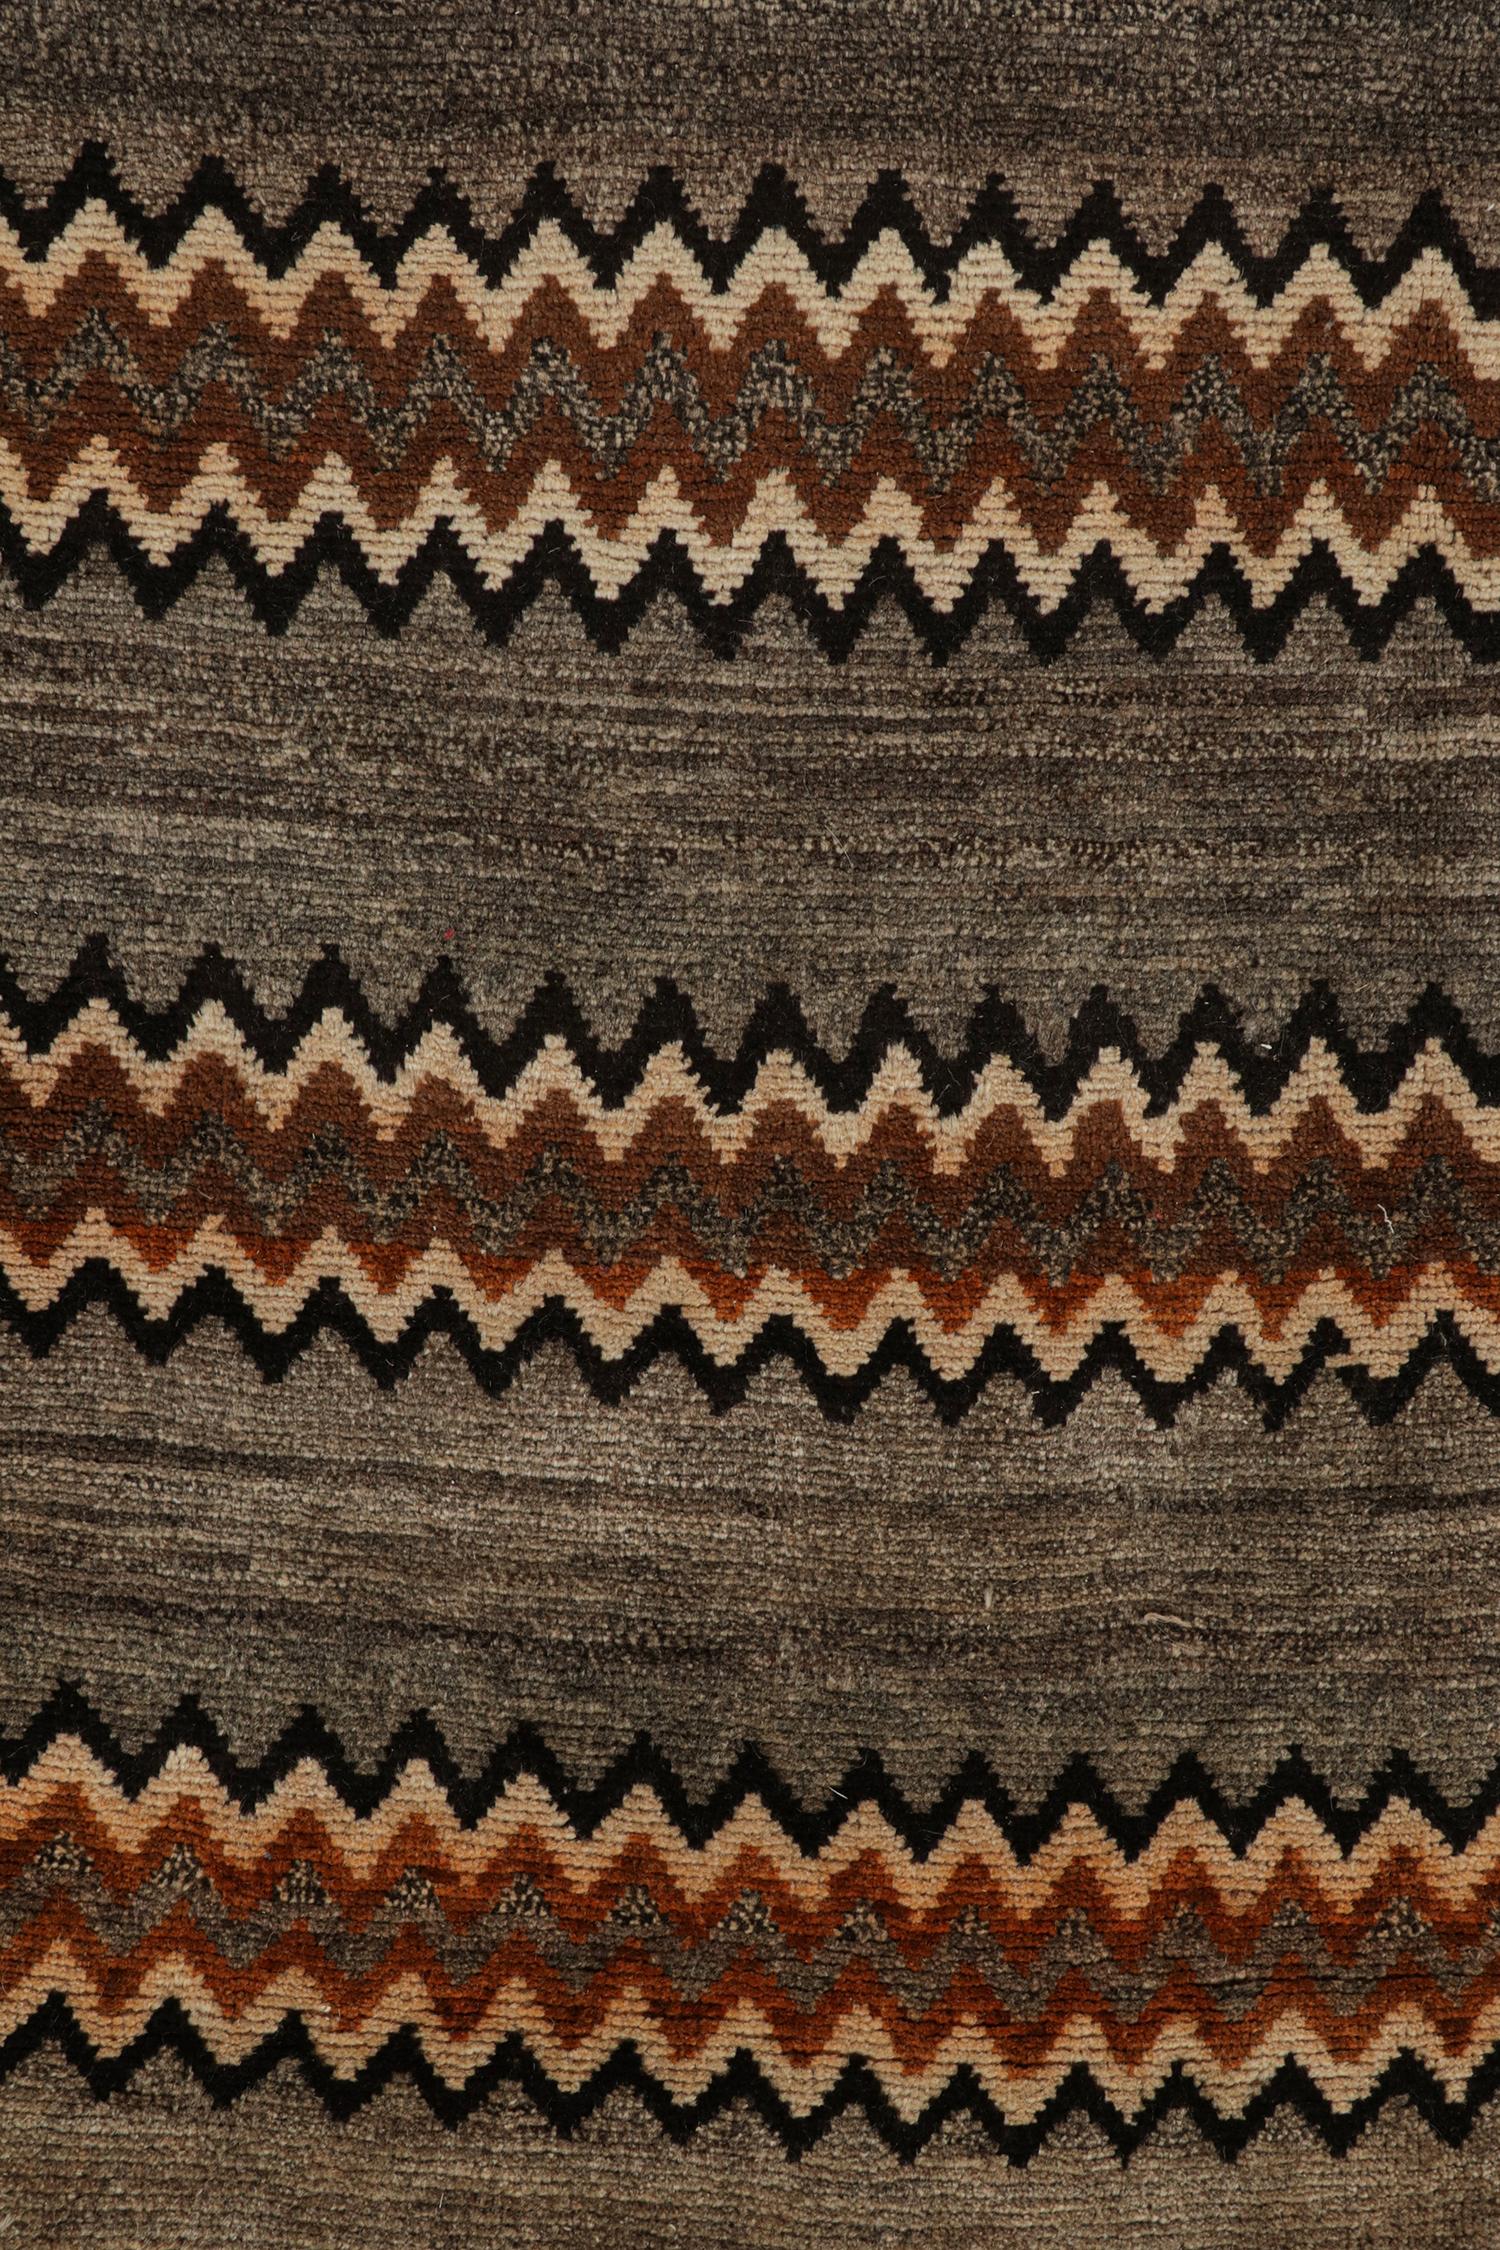 Mid-20th Century Vintage Gabbeh Tribal Rug in Gray & Beige-Brown Chevron Patterns by Rug & Kilim For Sale